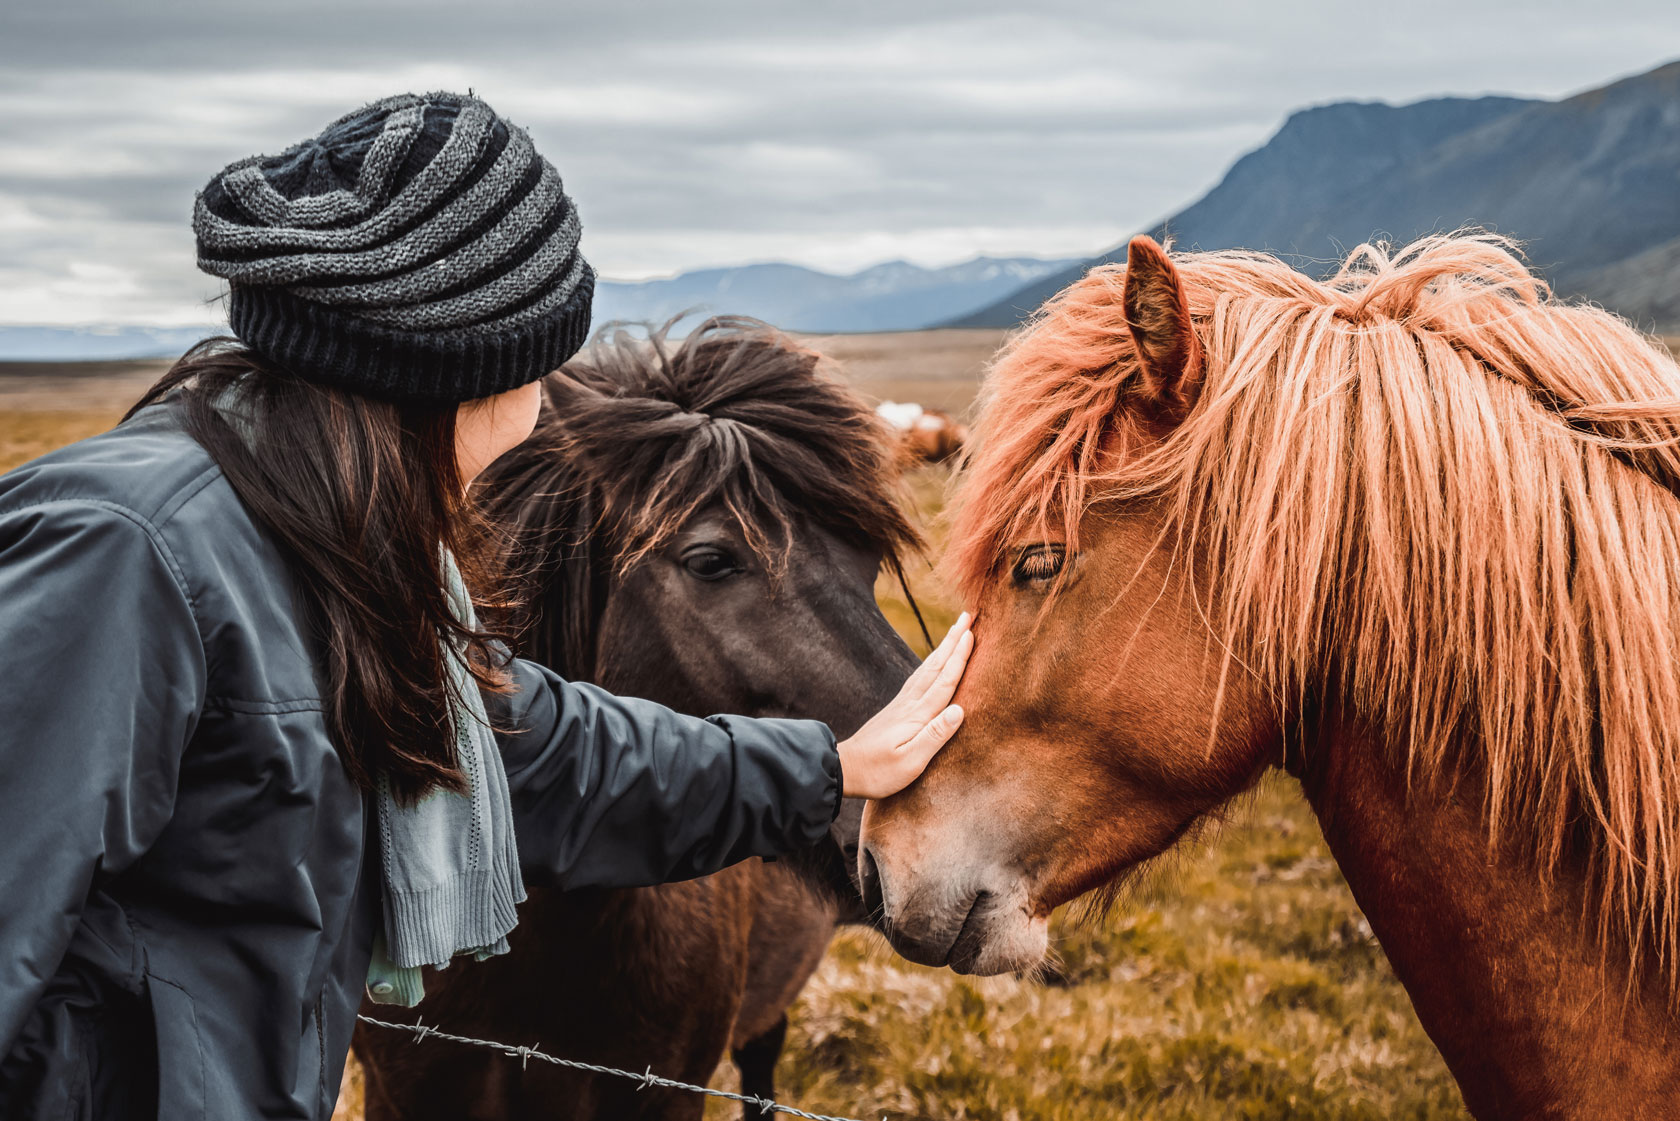 Icelandic horse in the field of scenic nature landscape of Iceland.